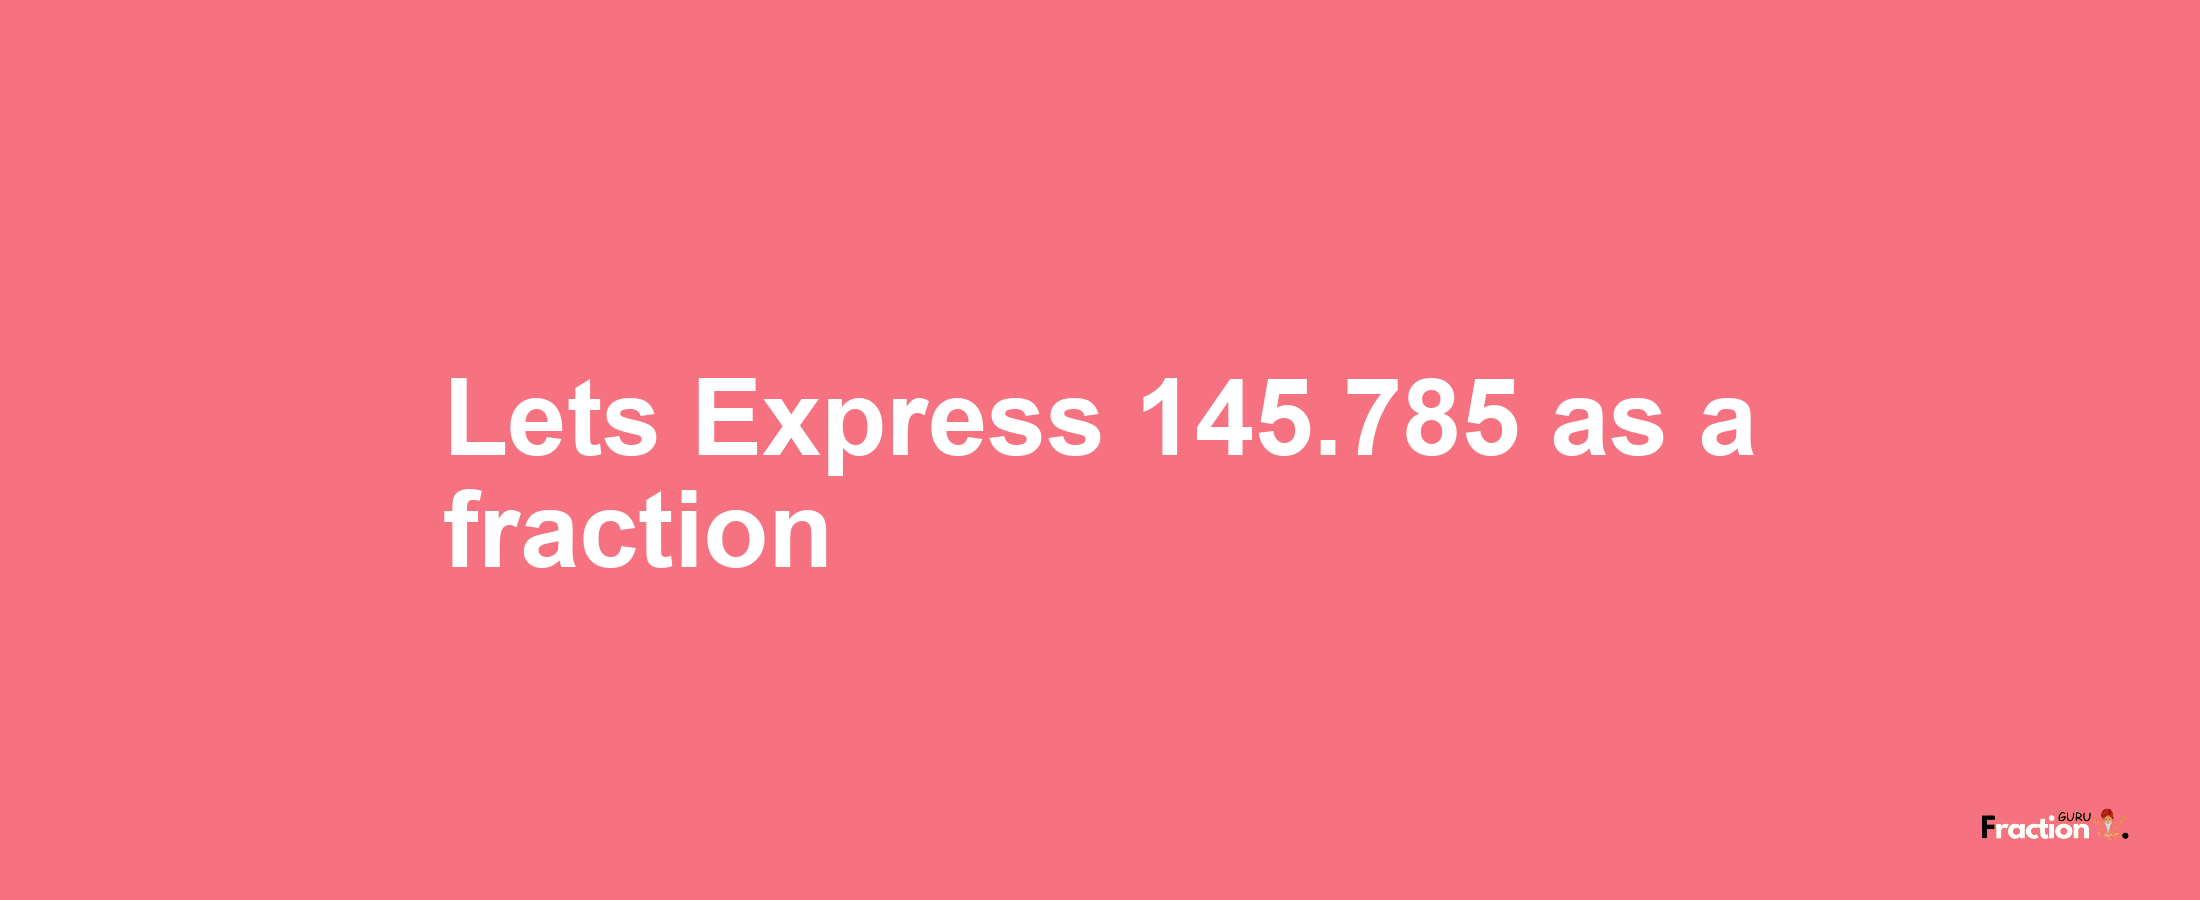 Lets Express 145.785 as afraction